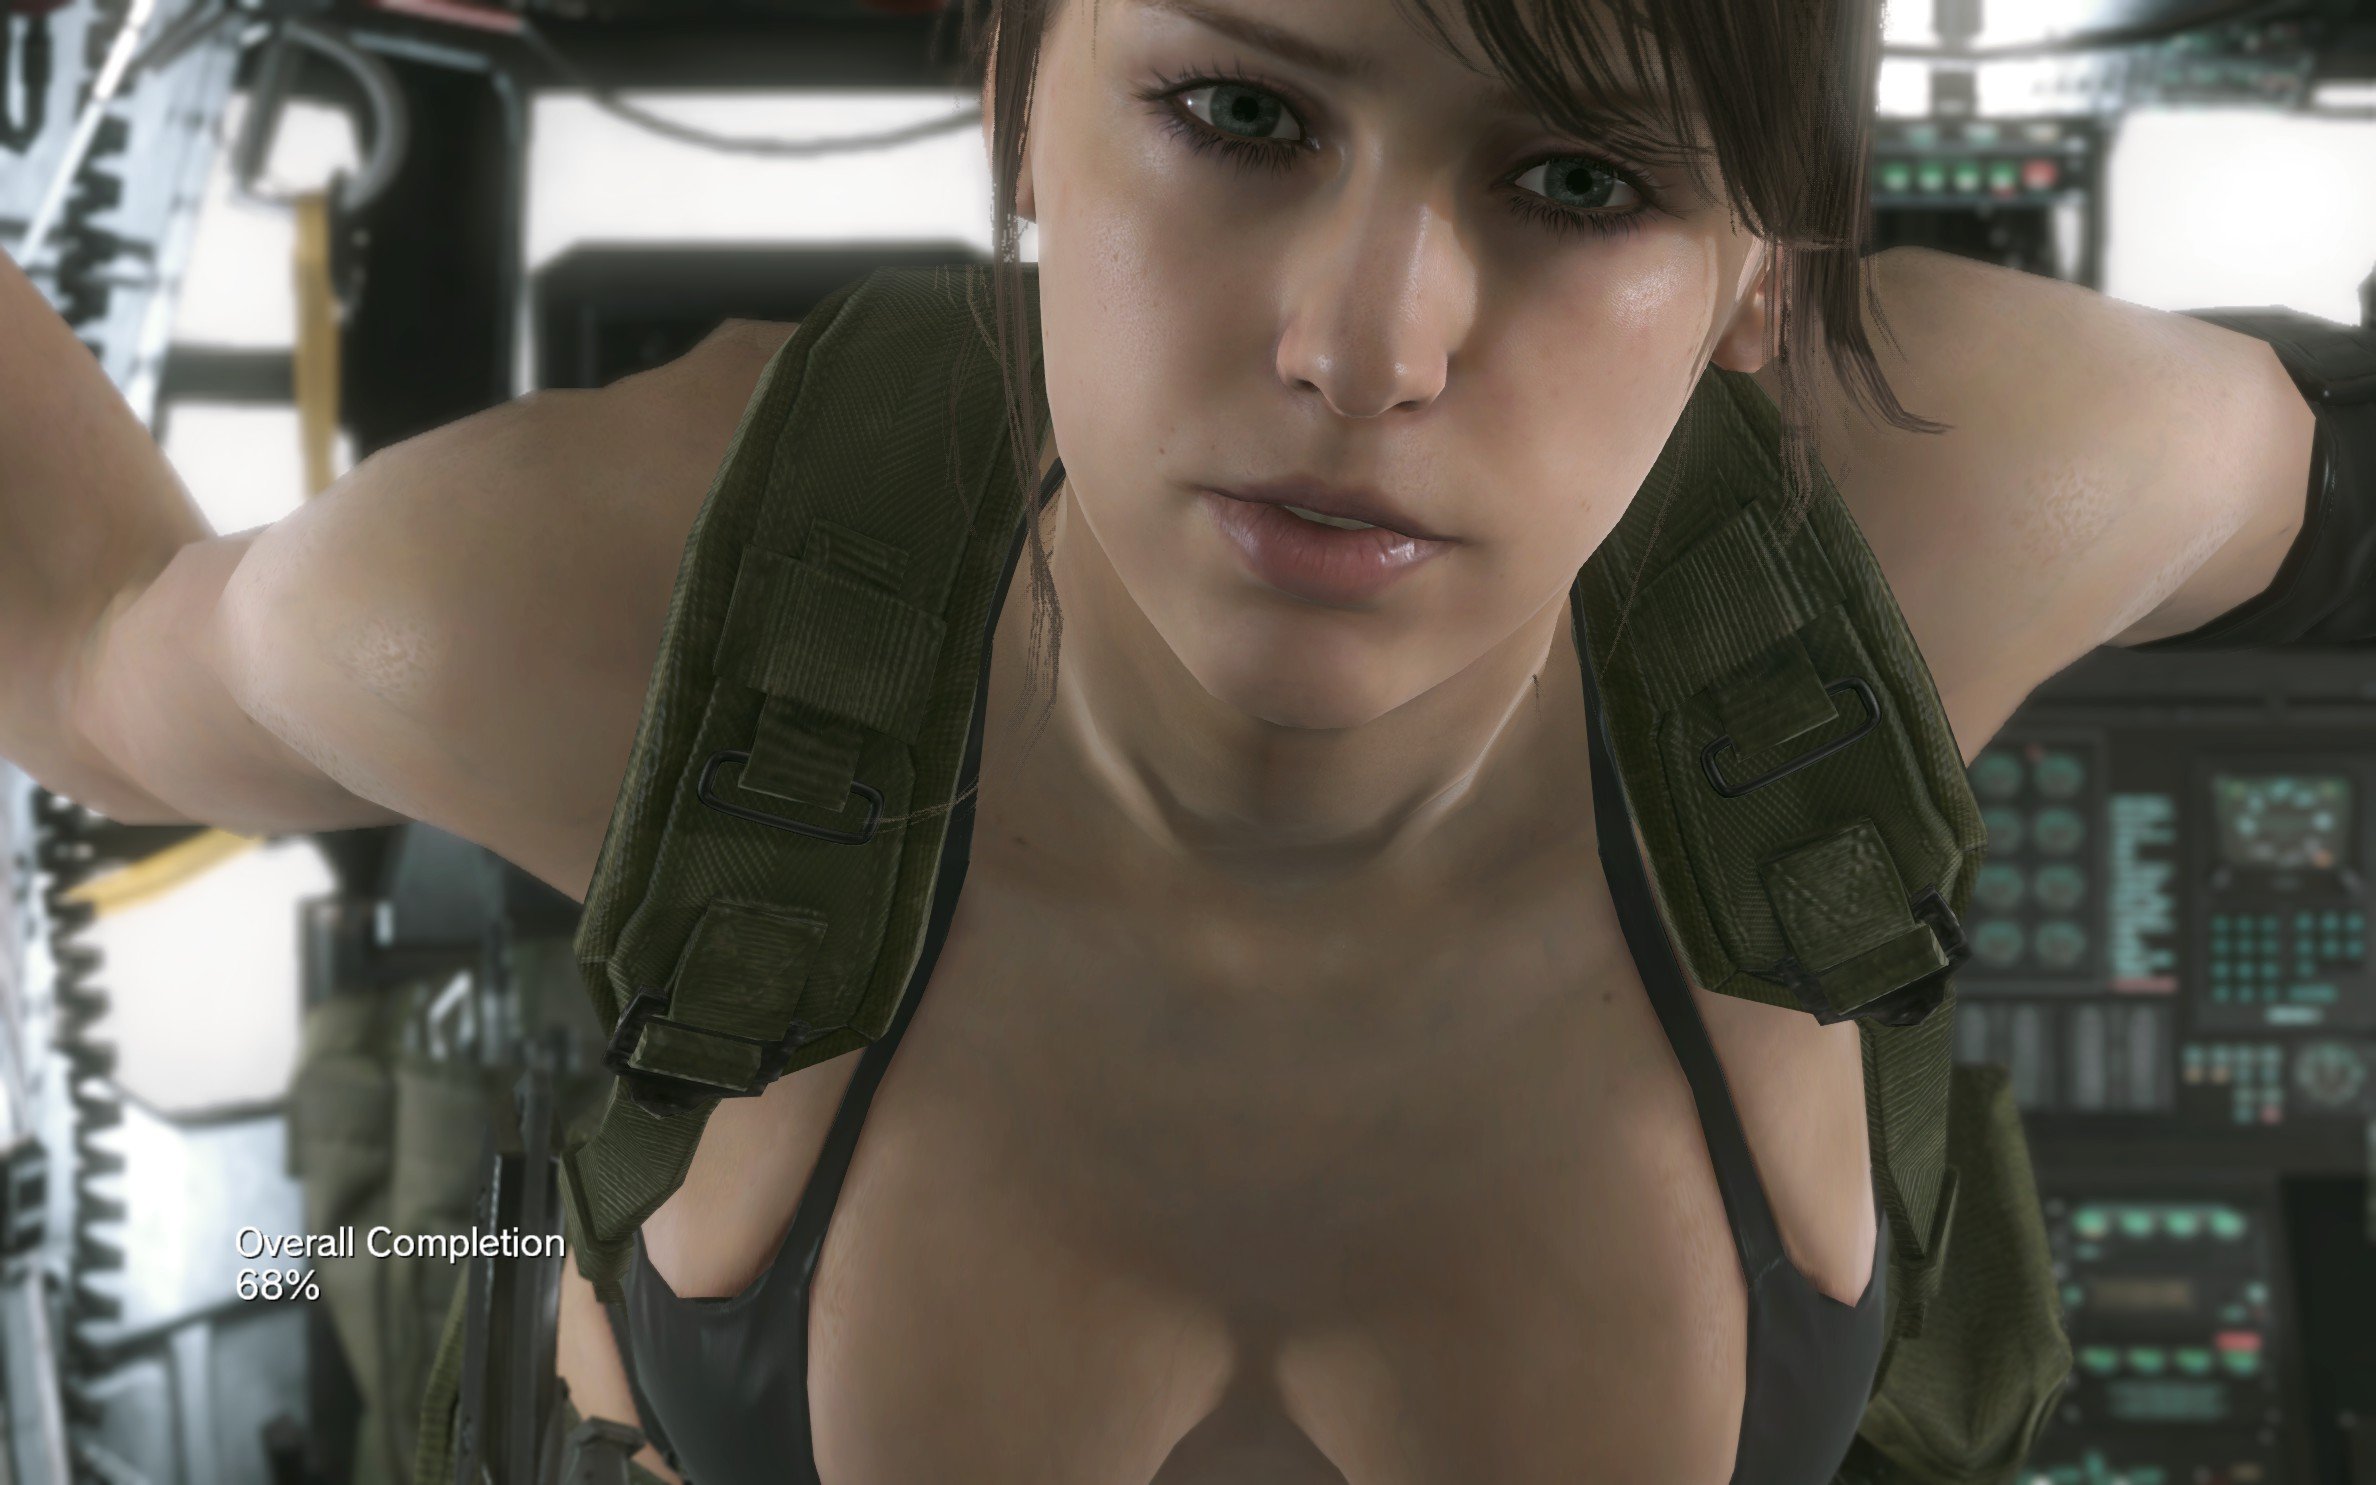 caroline kirkpatrick recommends mgs 5 quiet naked pic